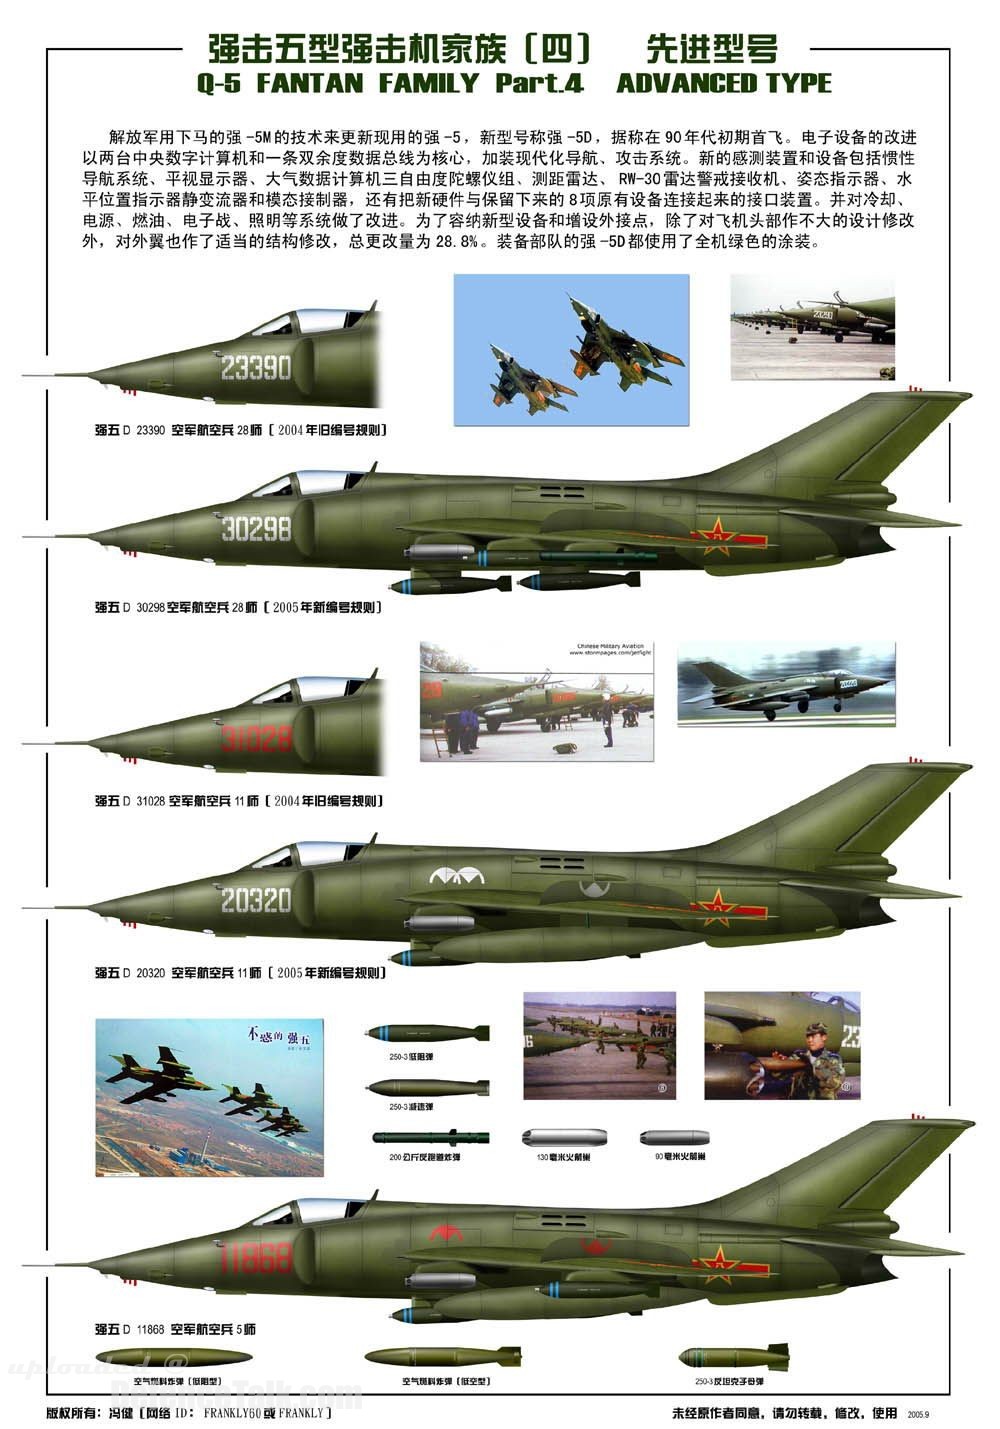 Q-5 Fantan - People's Liberation Army Air Force